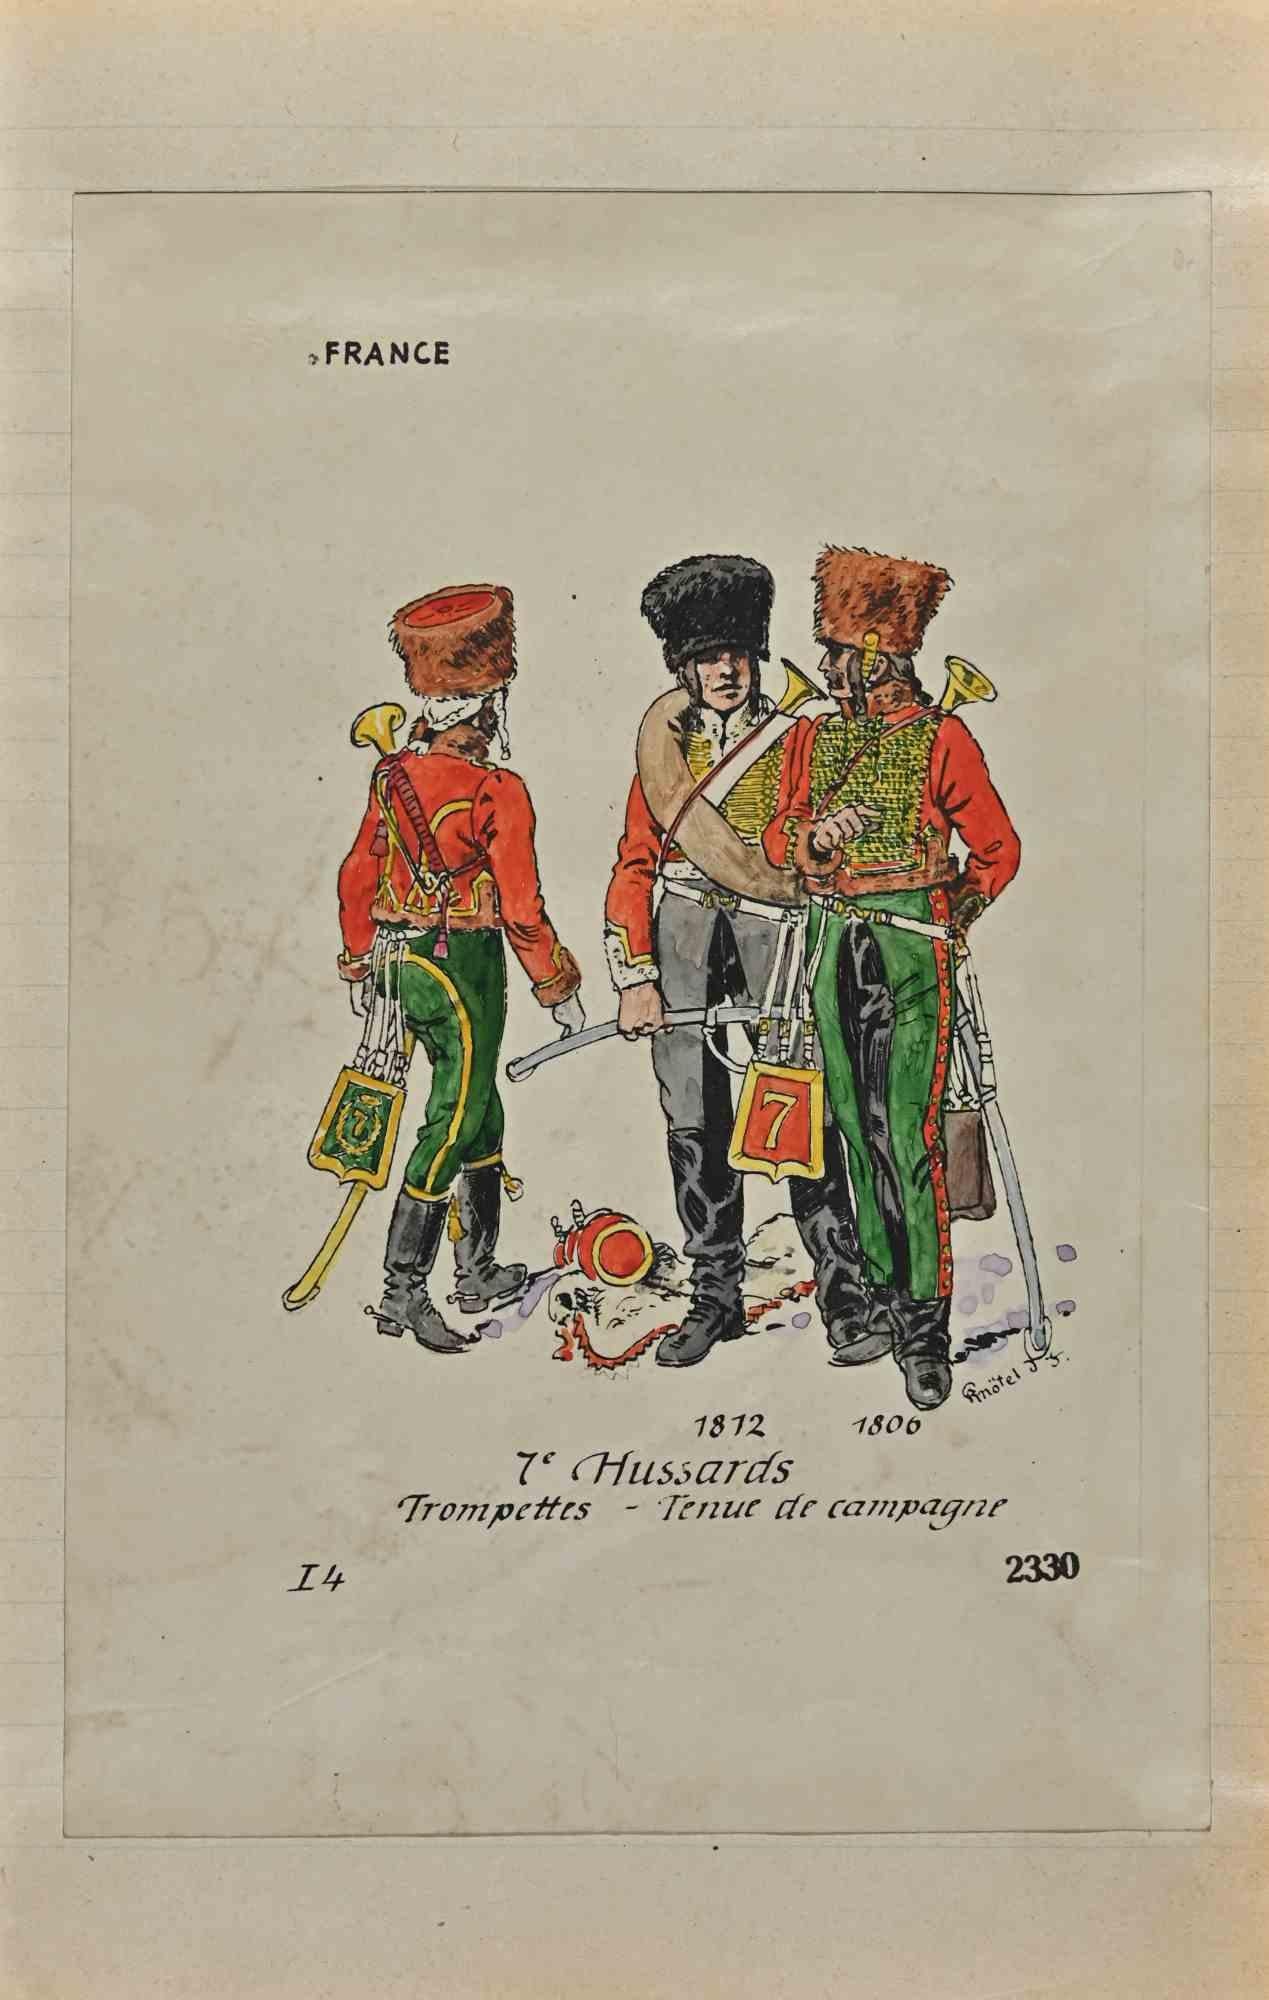 7e Hussards is an original drawing in ink and watercolor realized by Herbert Knotel in 1930/40s.

Good condition except for being aged.

Hand-signed.

The artwork is depicted through strong lines in well-balanced conditions.

Herbert Knotel was a